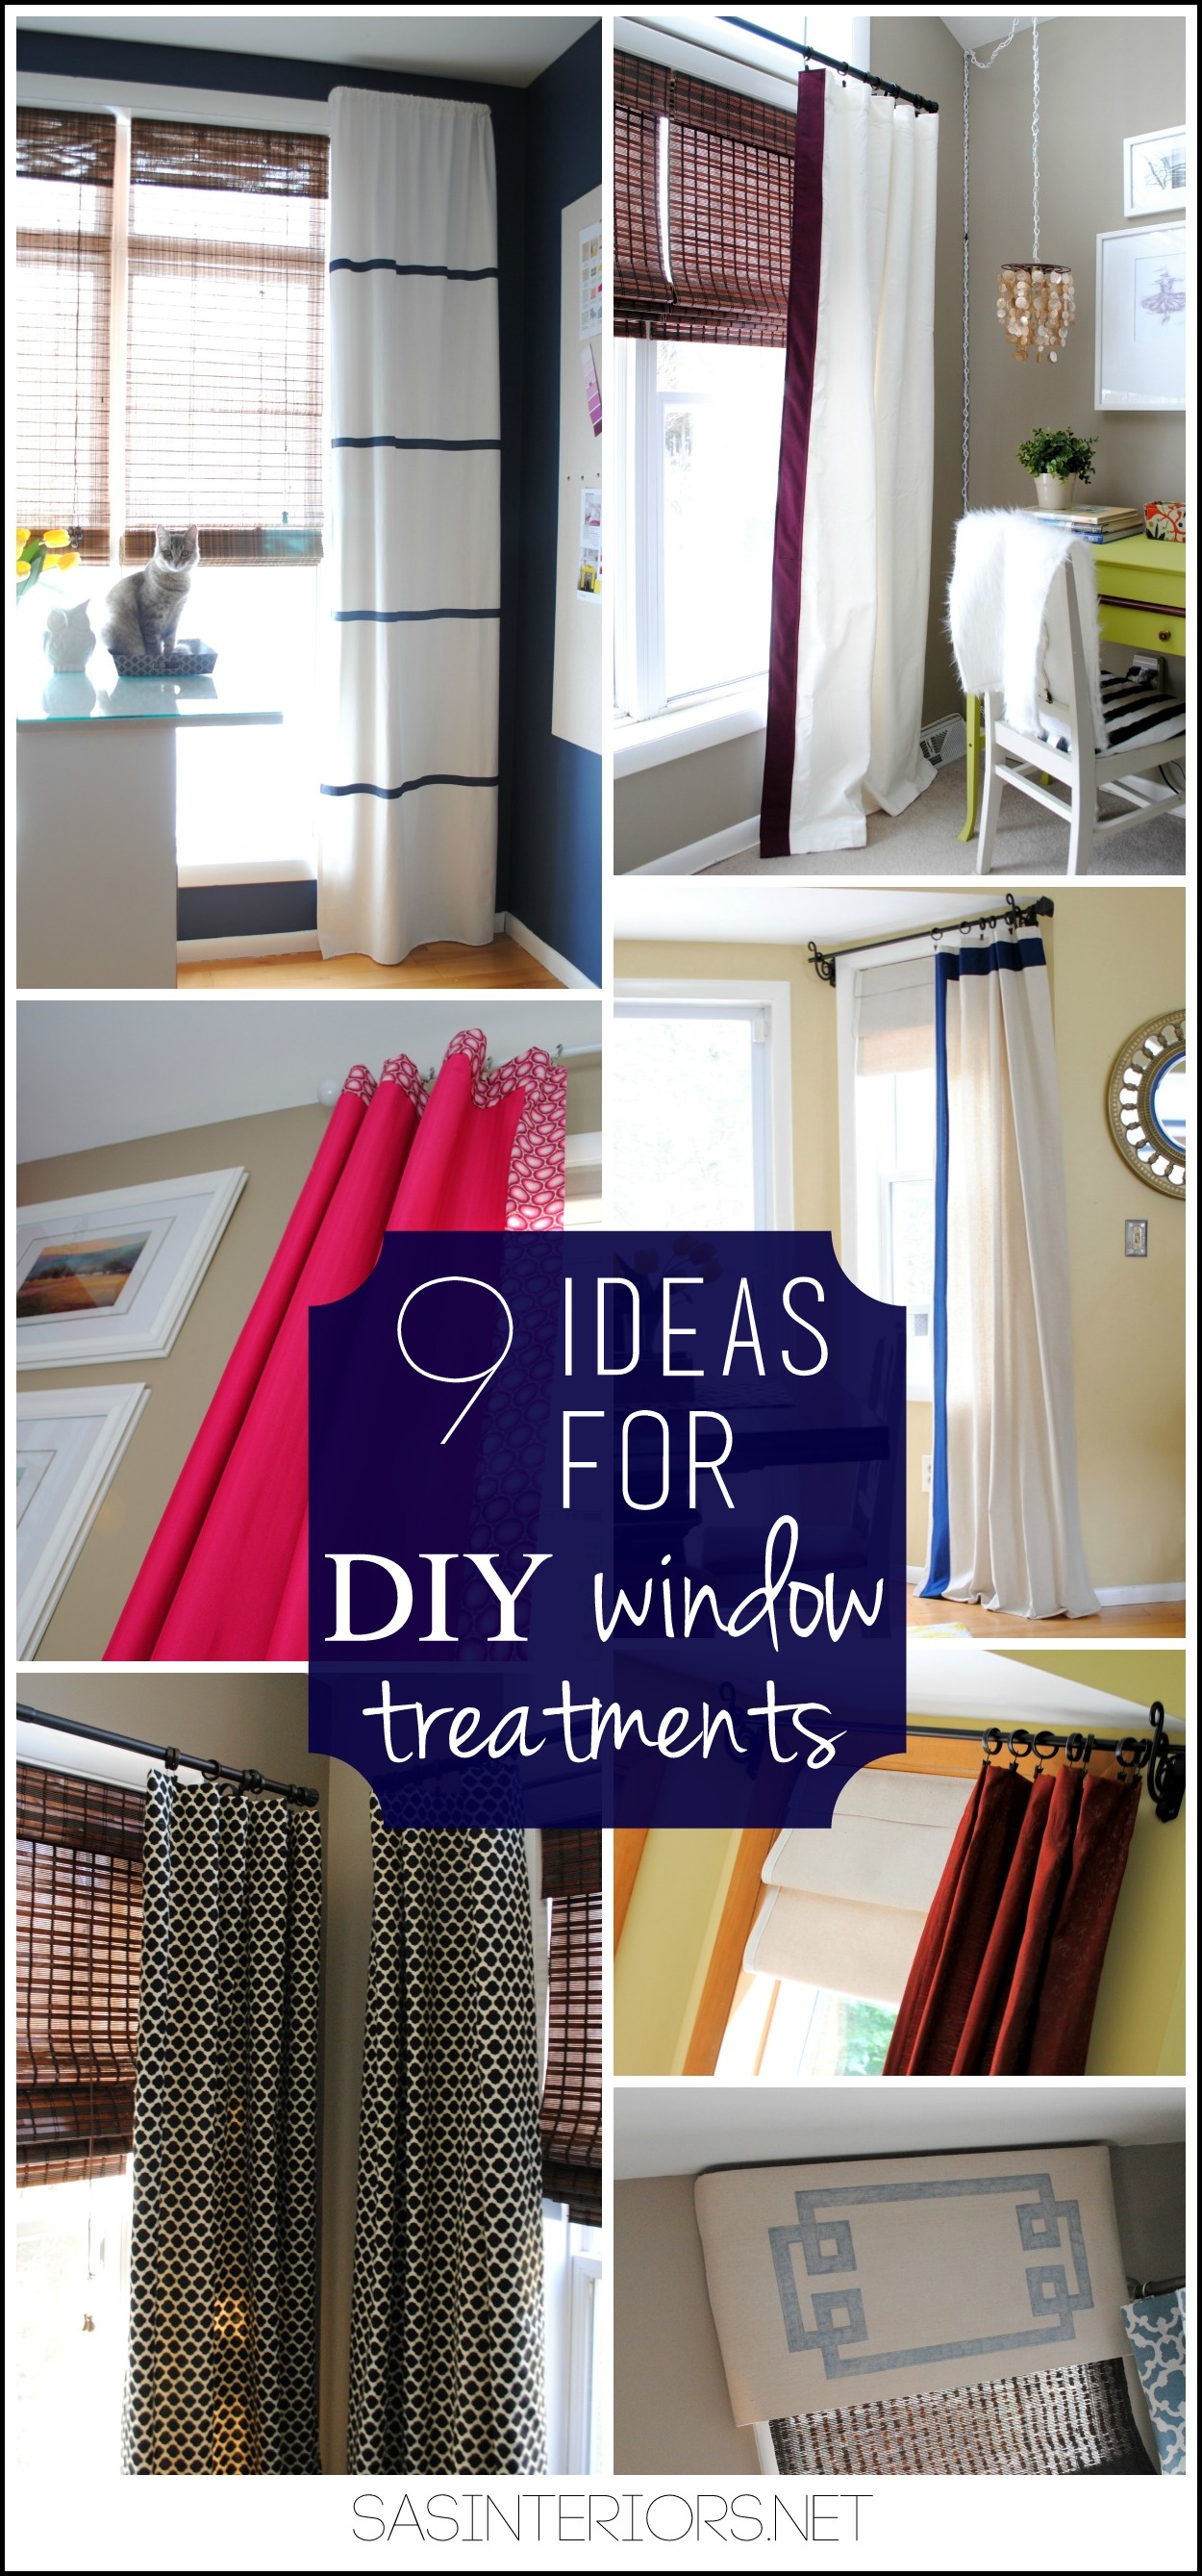 9 Ideas for DIY window treaments. Unique & Creative ideas for making your own window treatments and/or customizing store bought curtains. This is a must see post. All these window treatments are in ONE HOME!